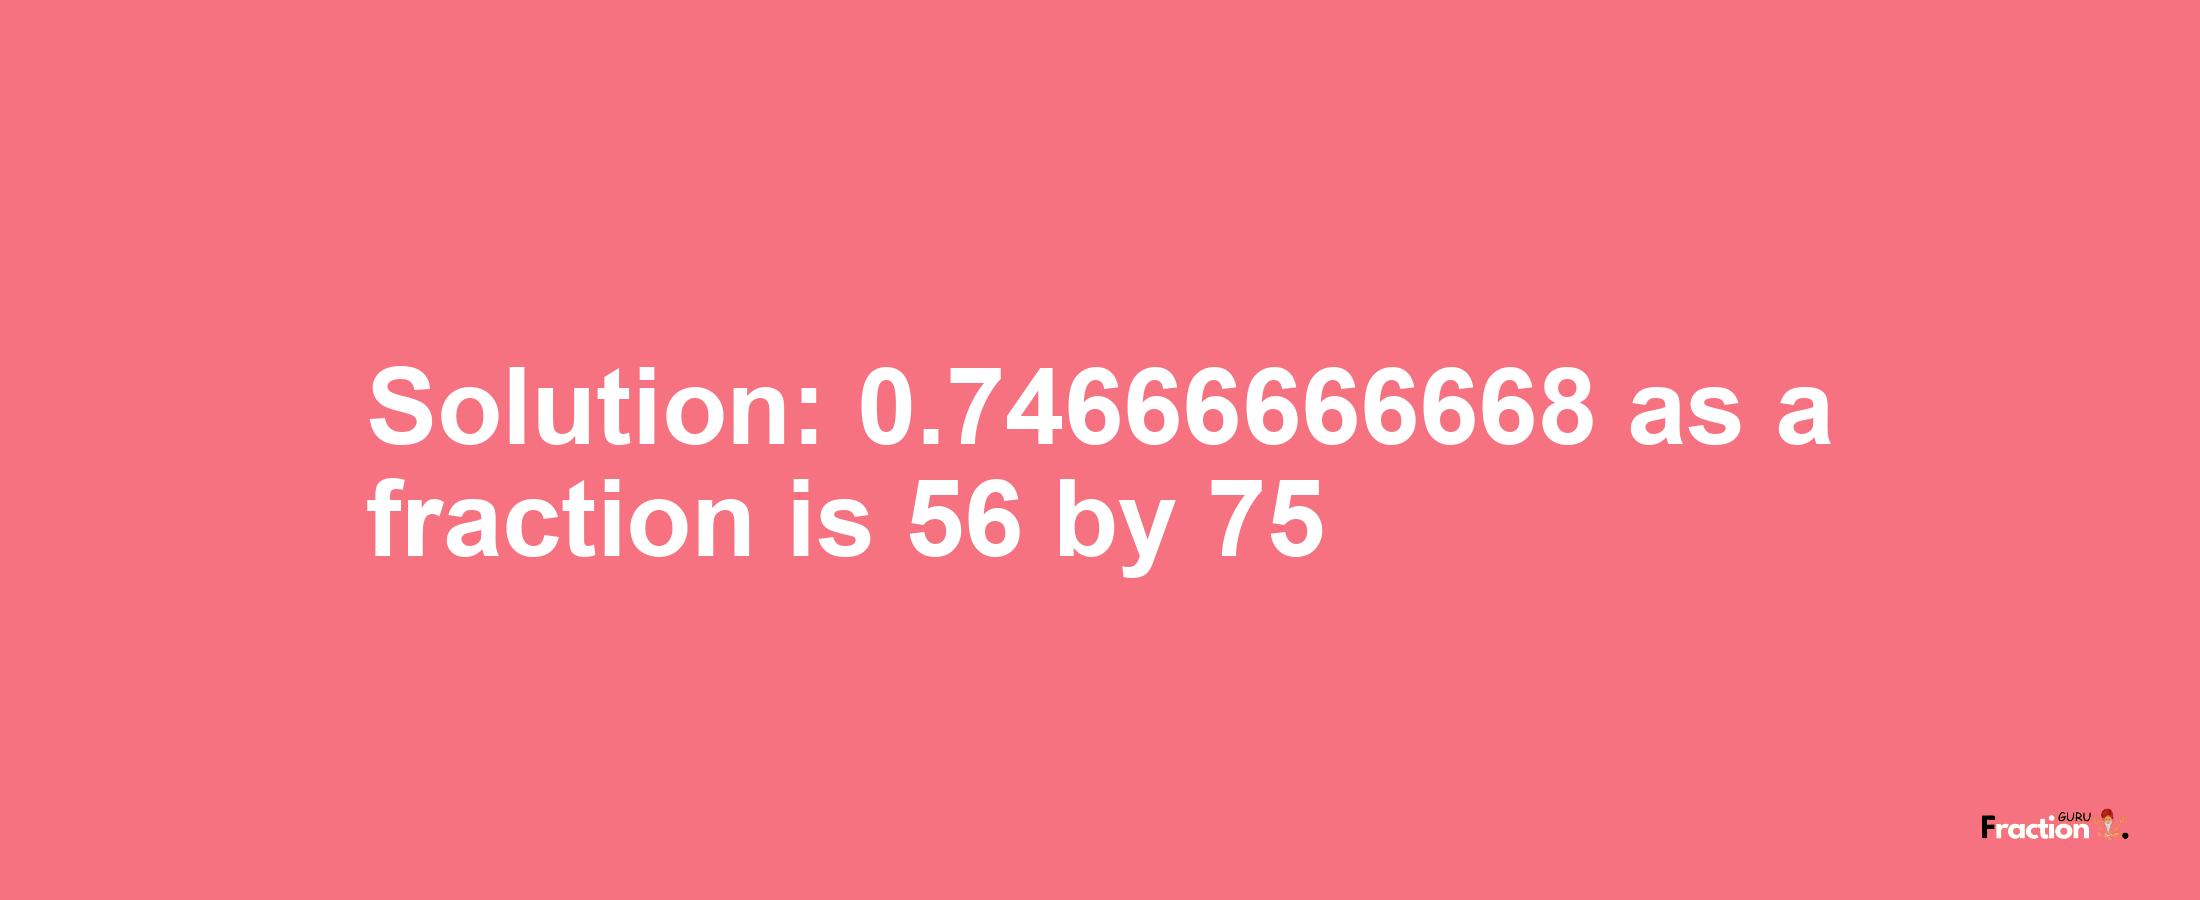 Solution:0.74666666668 as a fraction is 56/75